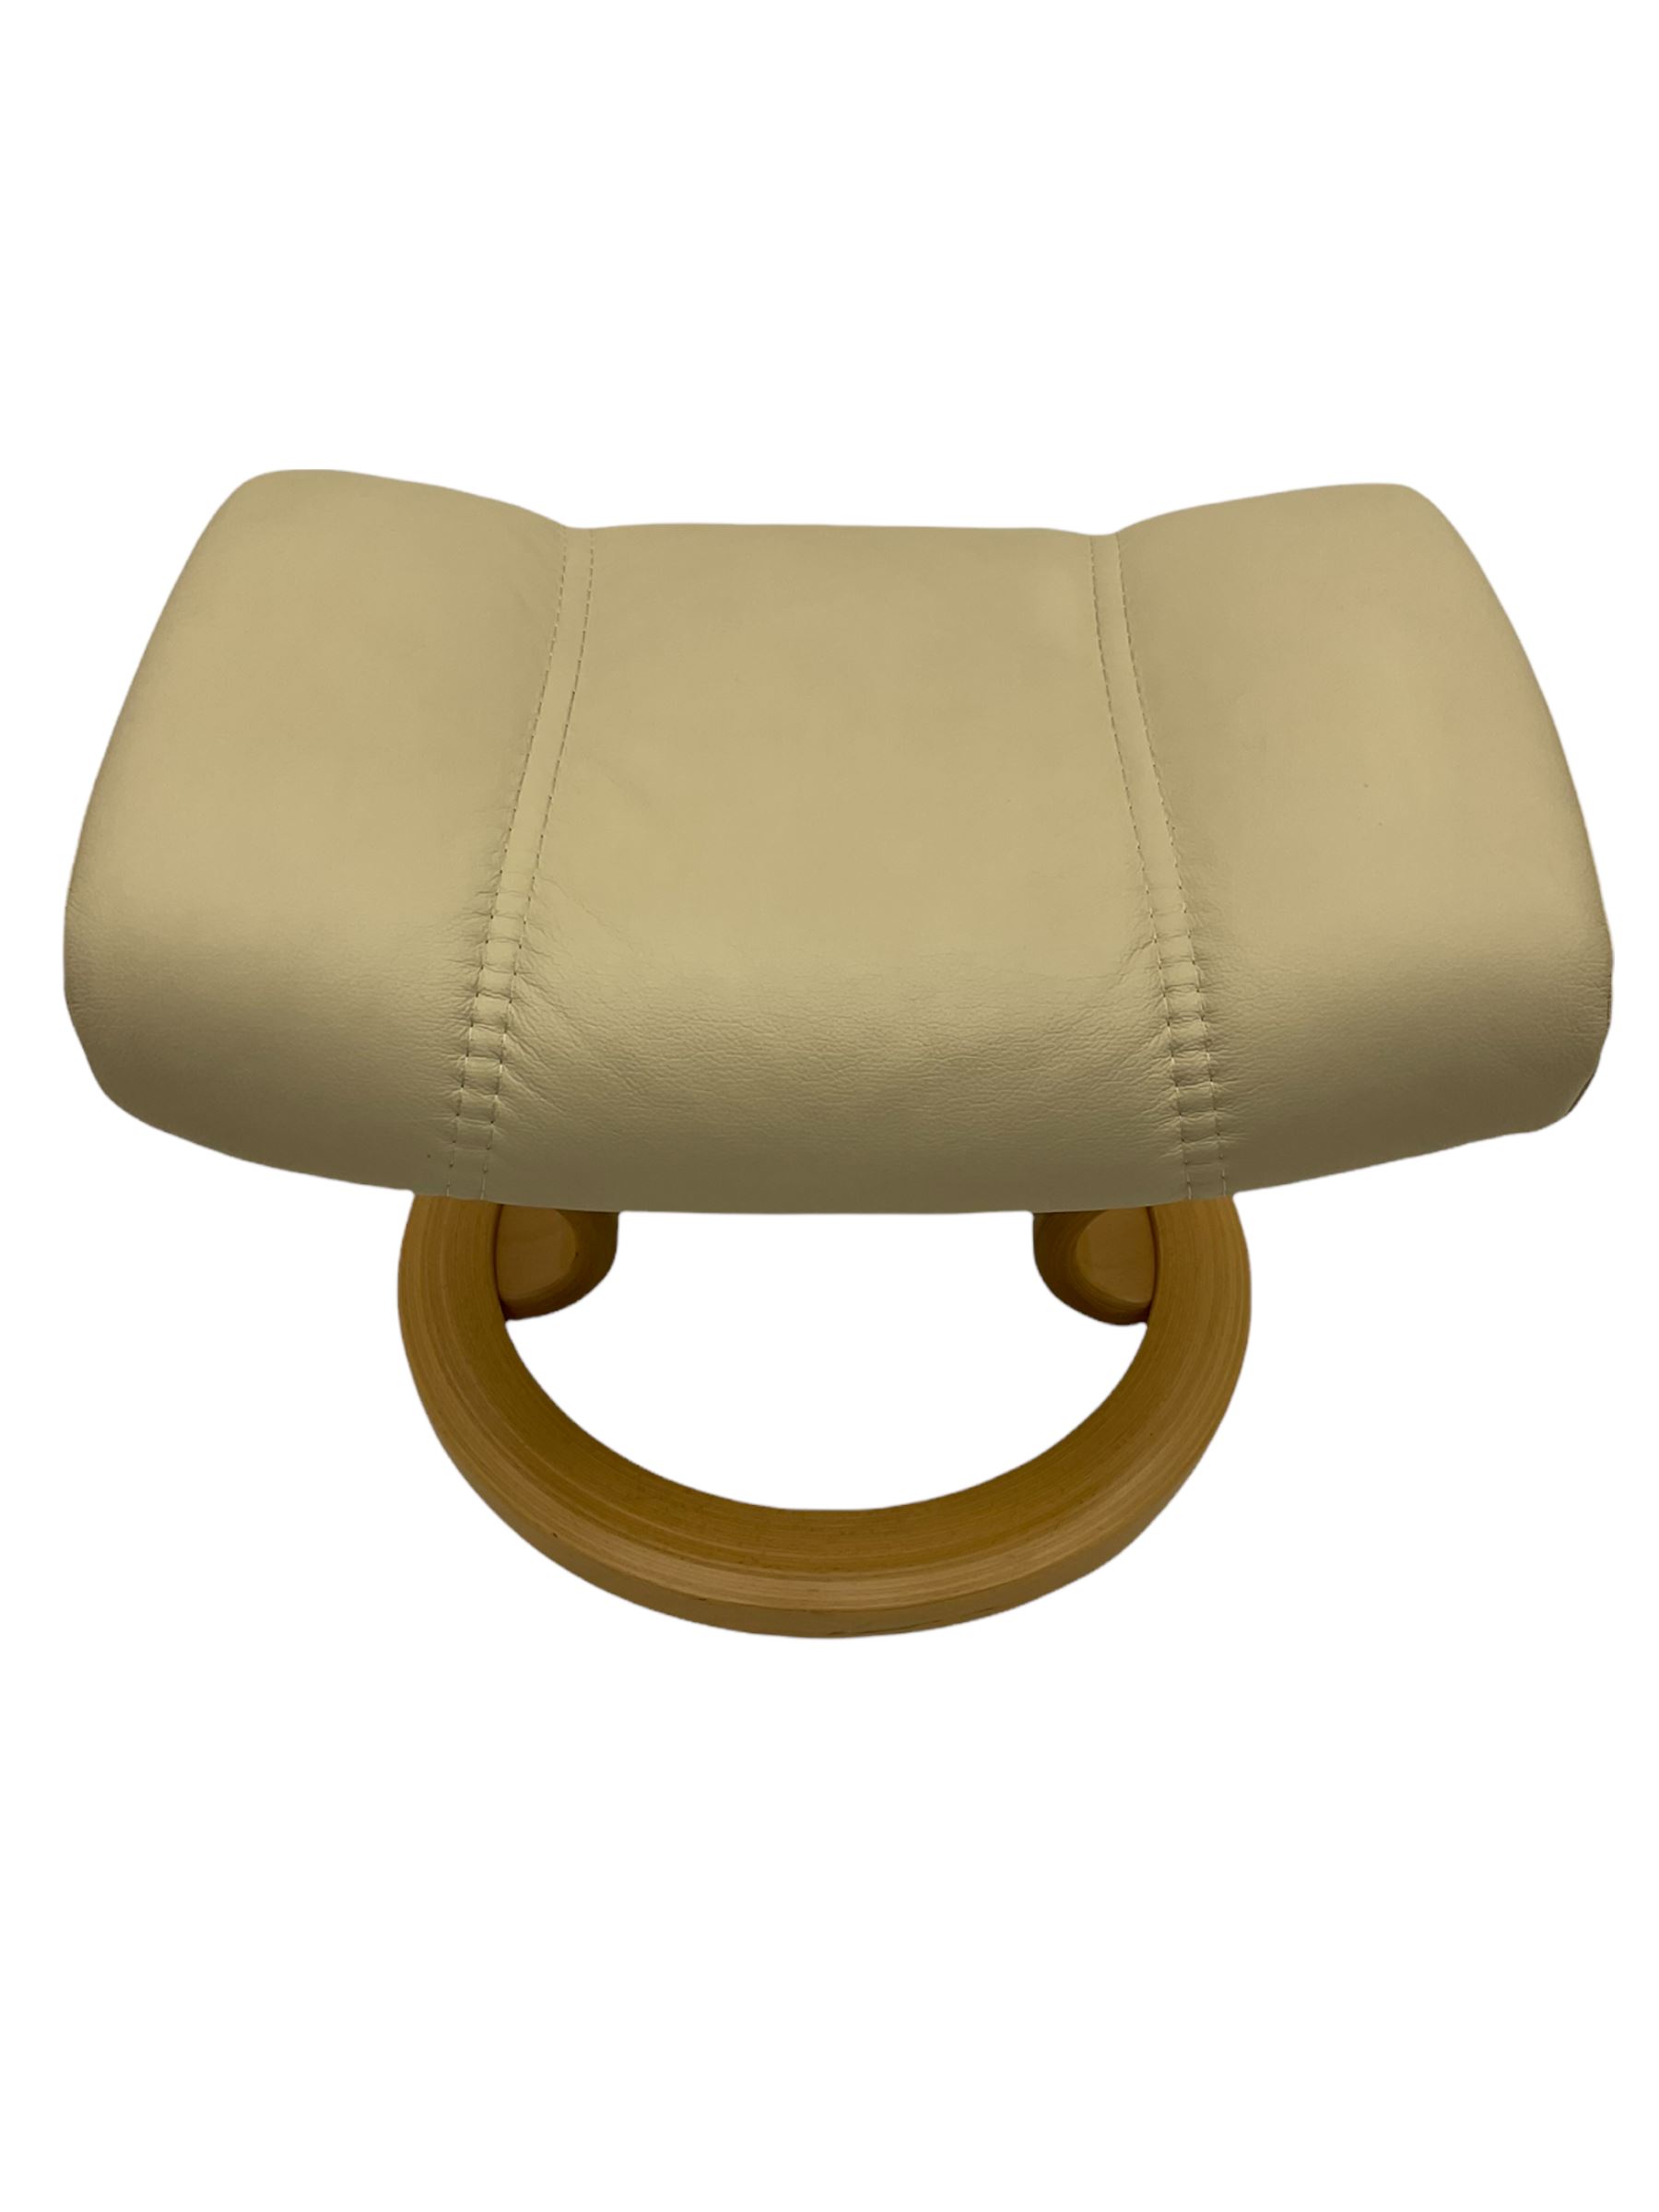 Ekornes - Stressless armchair upholstered in cream leather with matching footstool - Image 5 of 16